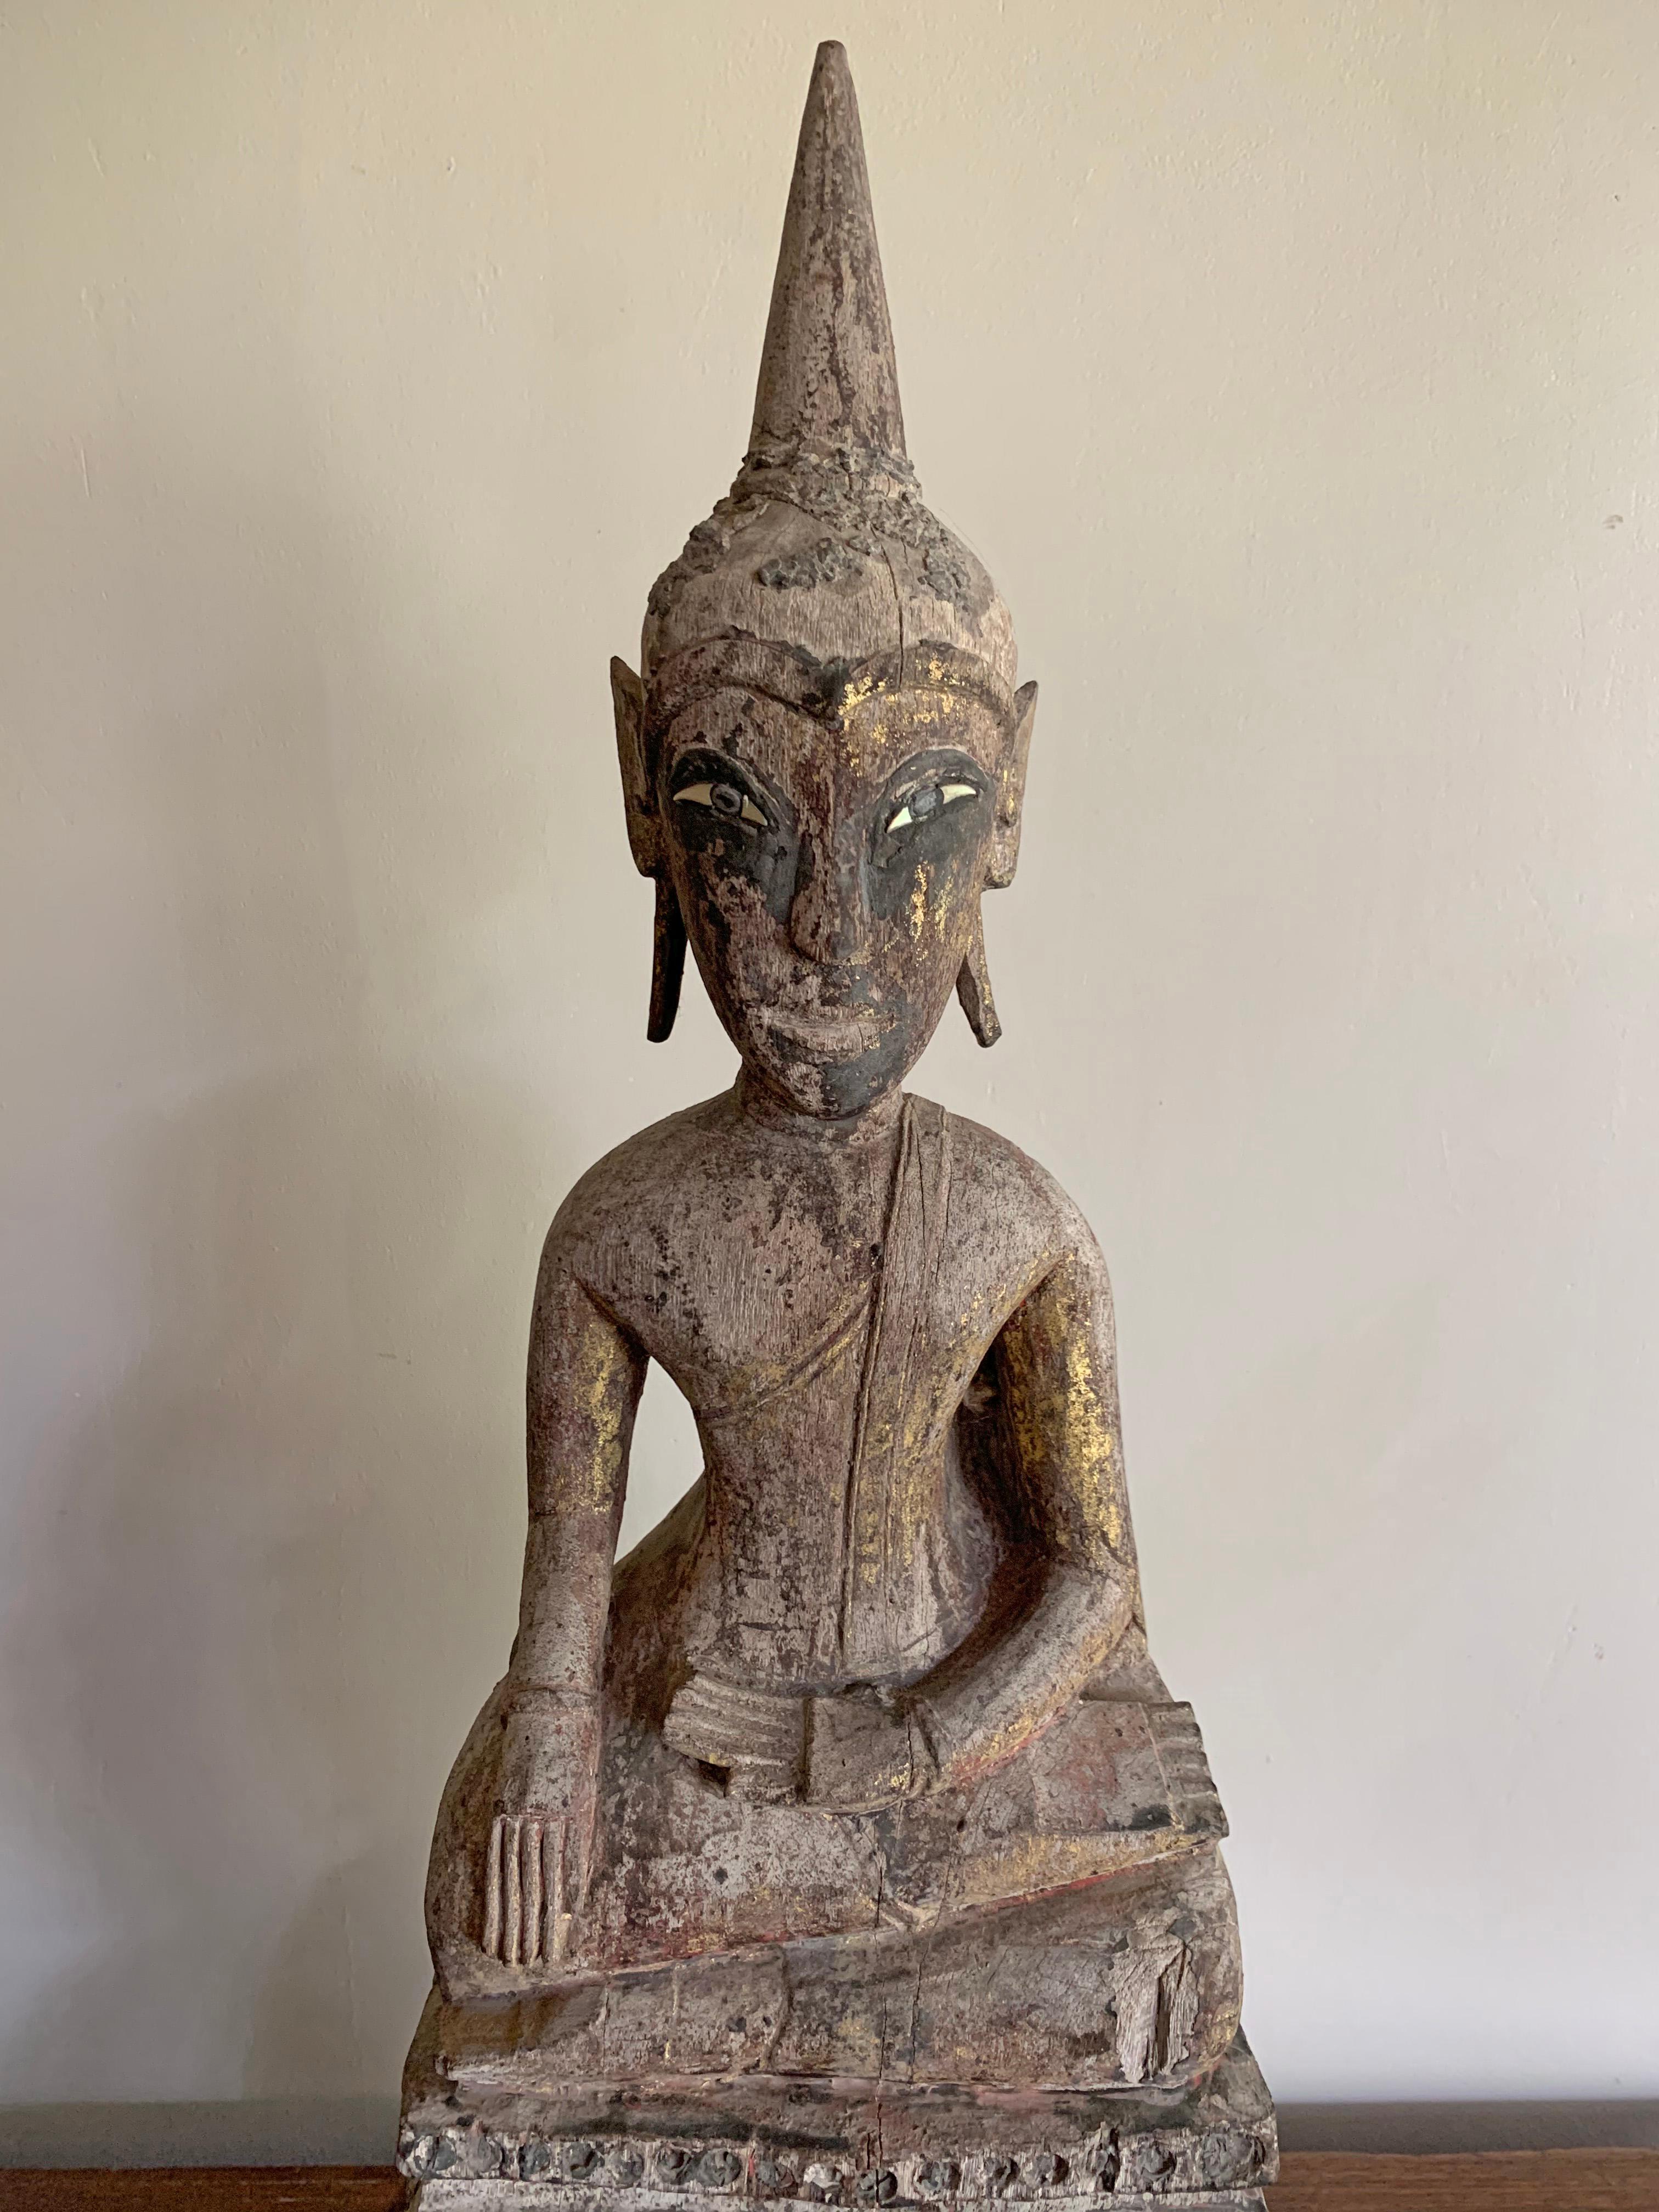 This buddha is a hand-carved from wood and originates from Burma, modern day Myanmar. It once featured an elaborate gilded finish (covered in gold leaf), however much of this has worn away over the decades. However there are faint traces of the